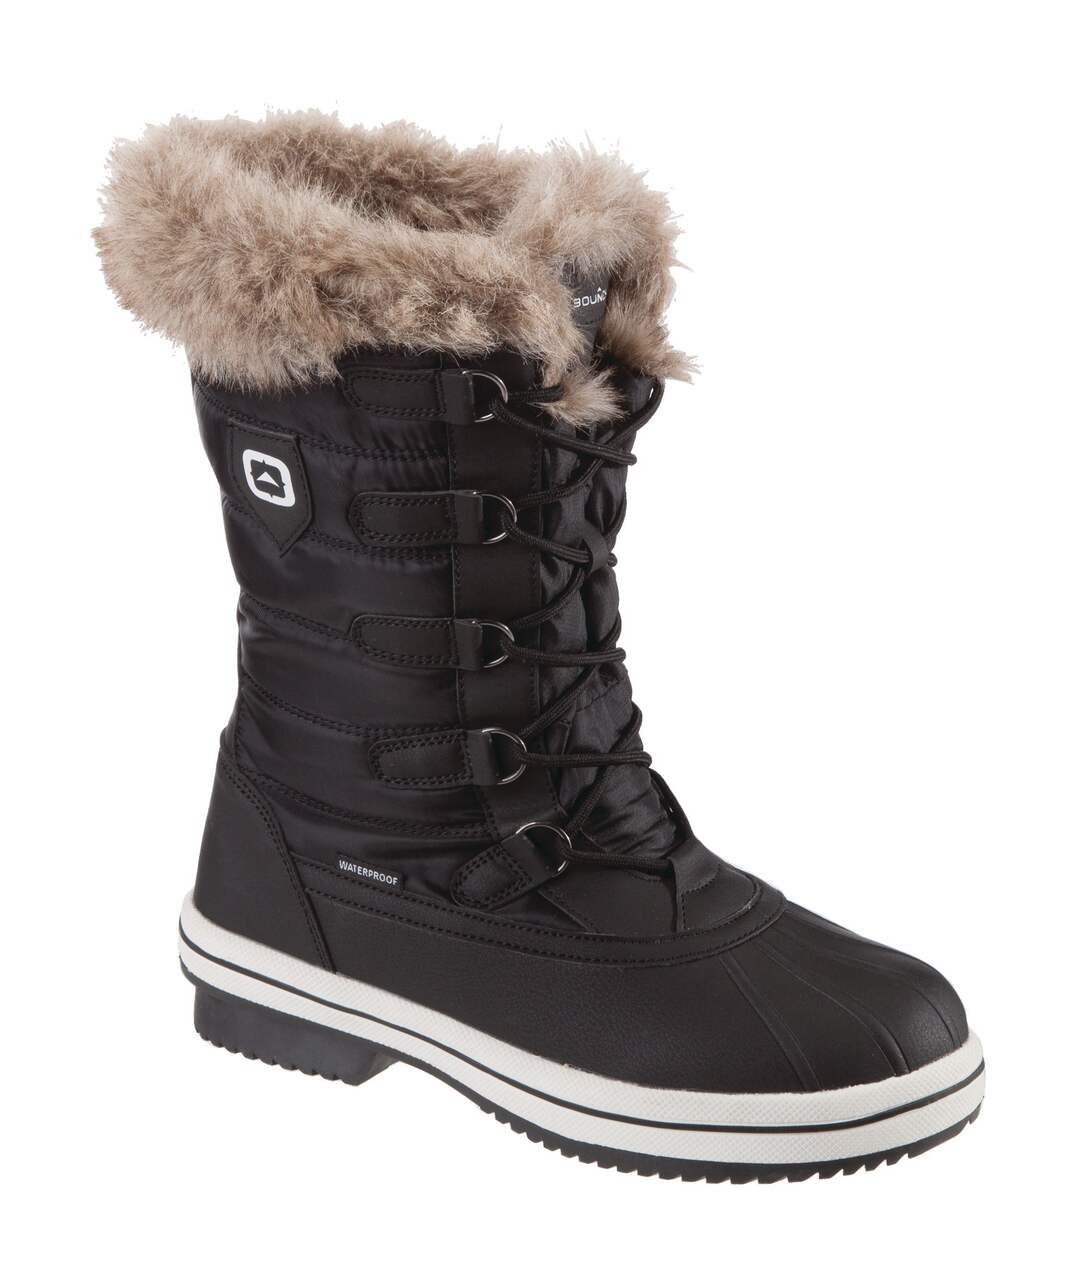 Outbound Women's Muskoka Insulated Water-Resistant Winter Snow Boots Cozy  Knit Cuff, Black